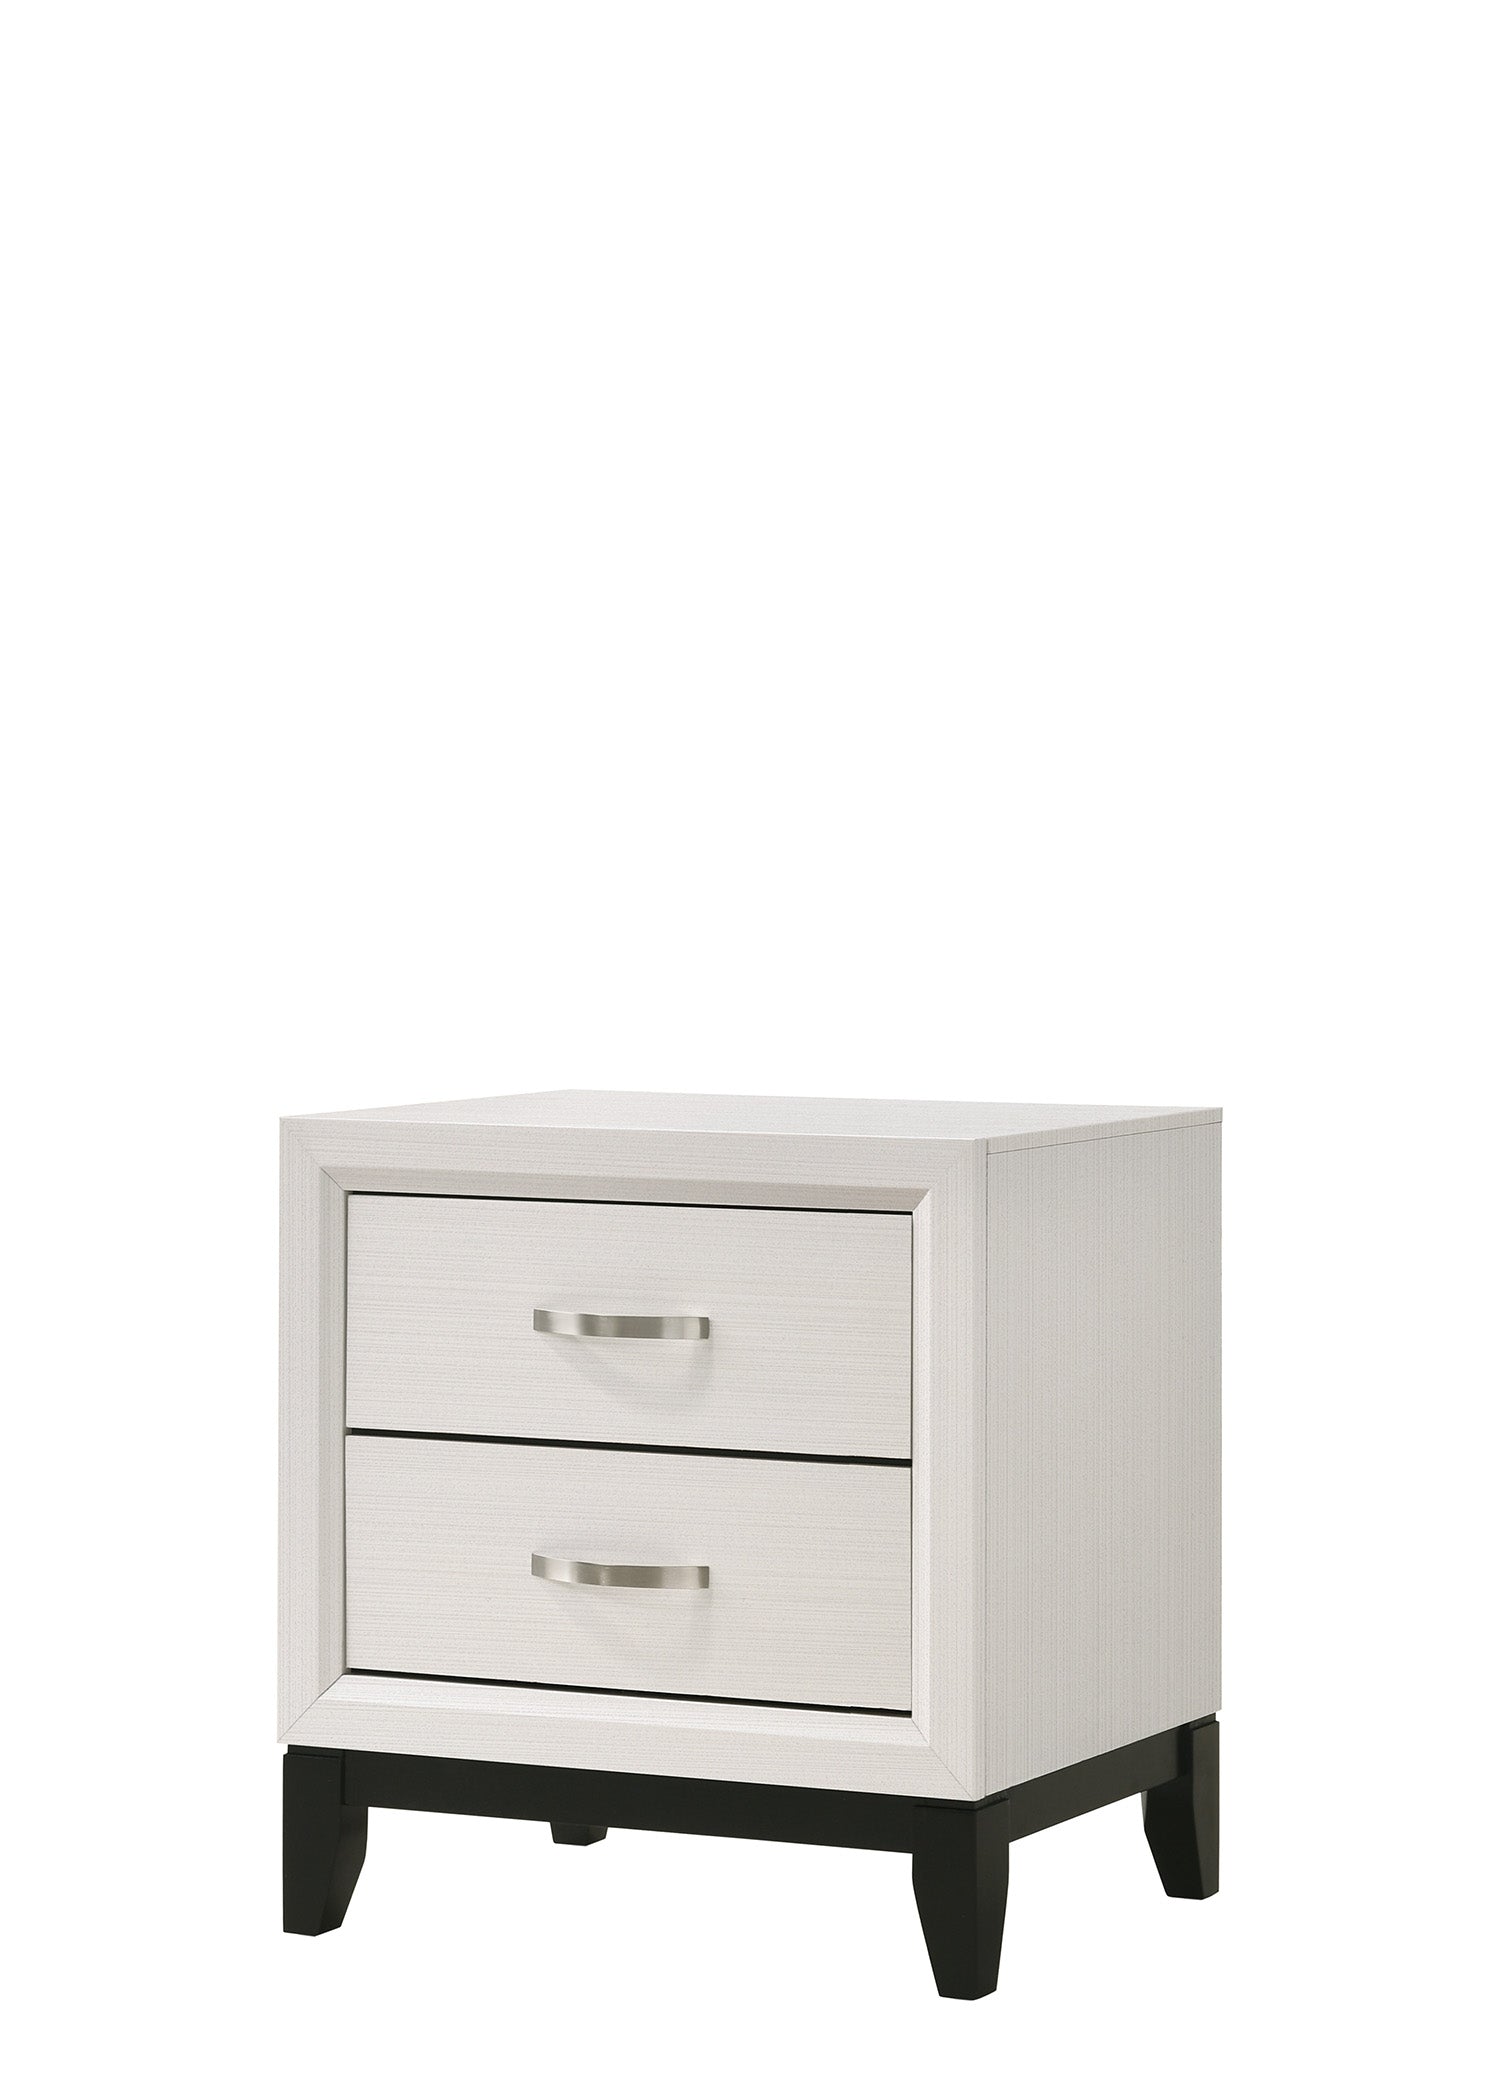 Akerson Night Stand Chalk, Modern Wood, Metal Curved 2 Drawers